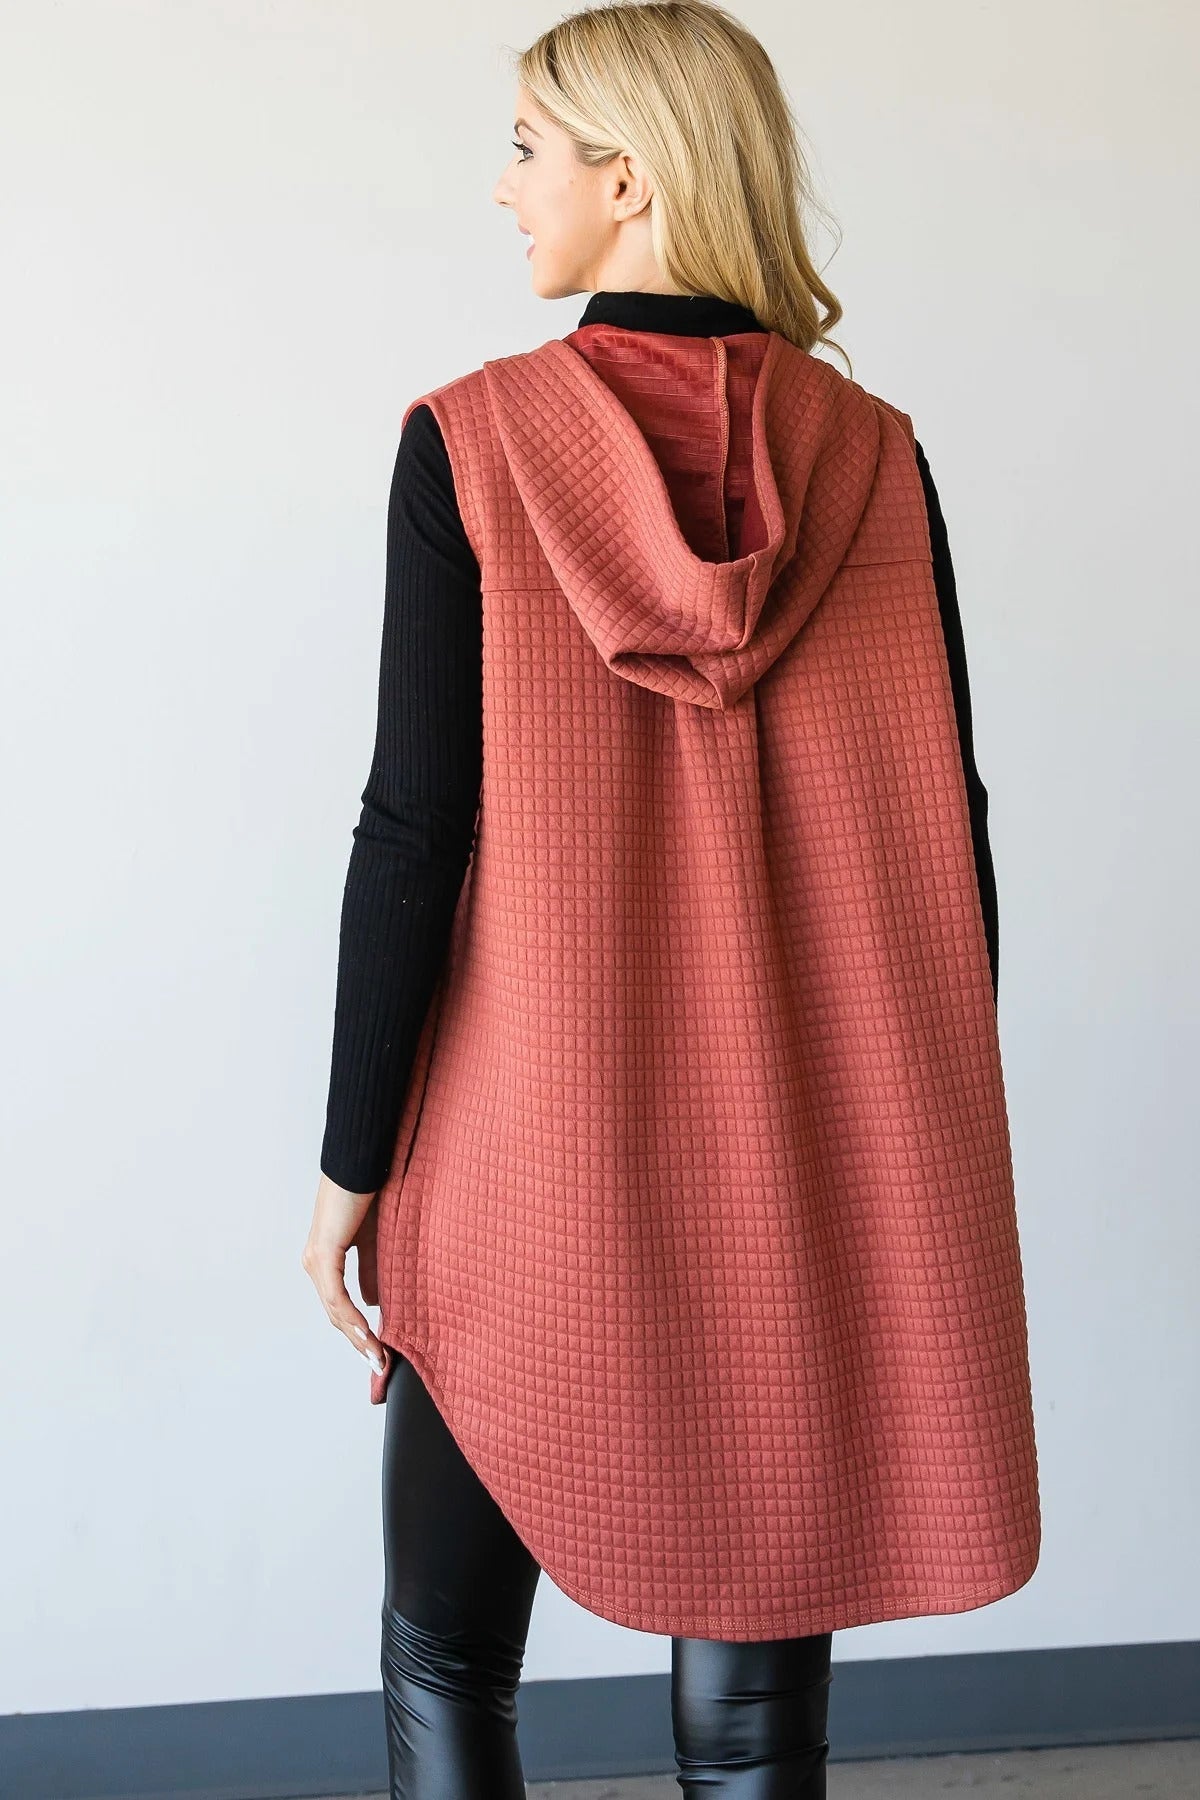 Vest-inspired Jacket With A Collared Neckline